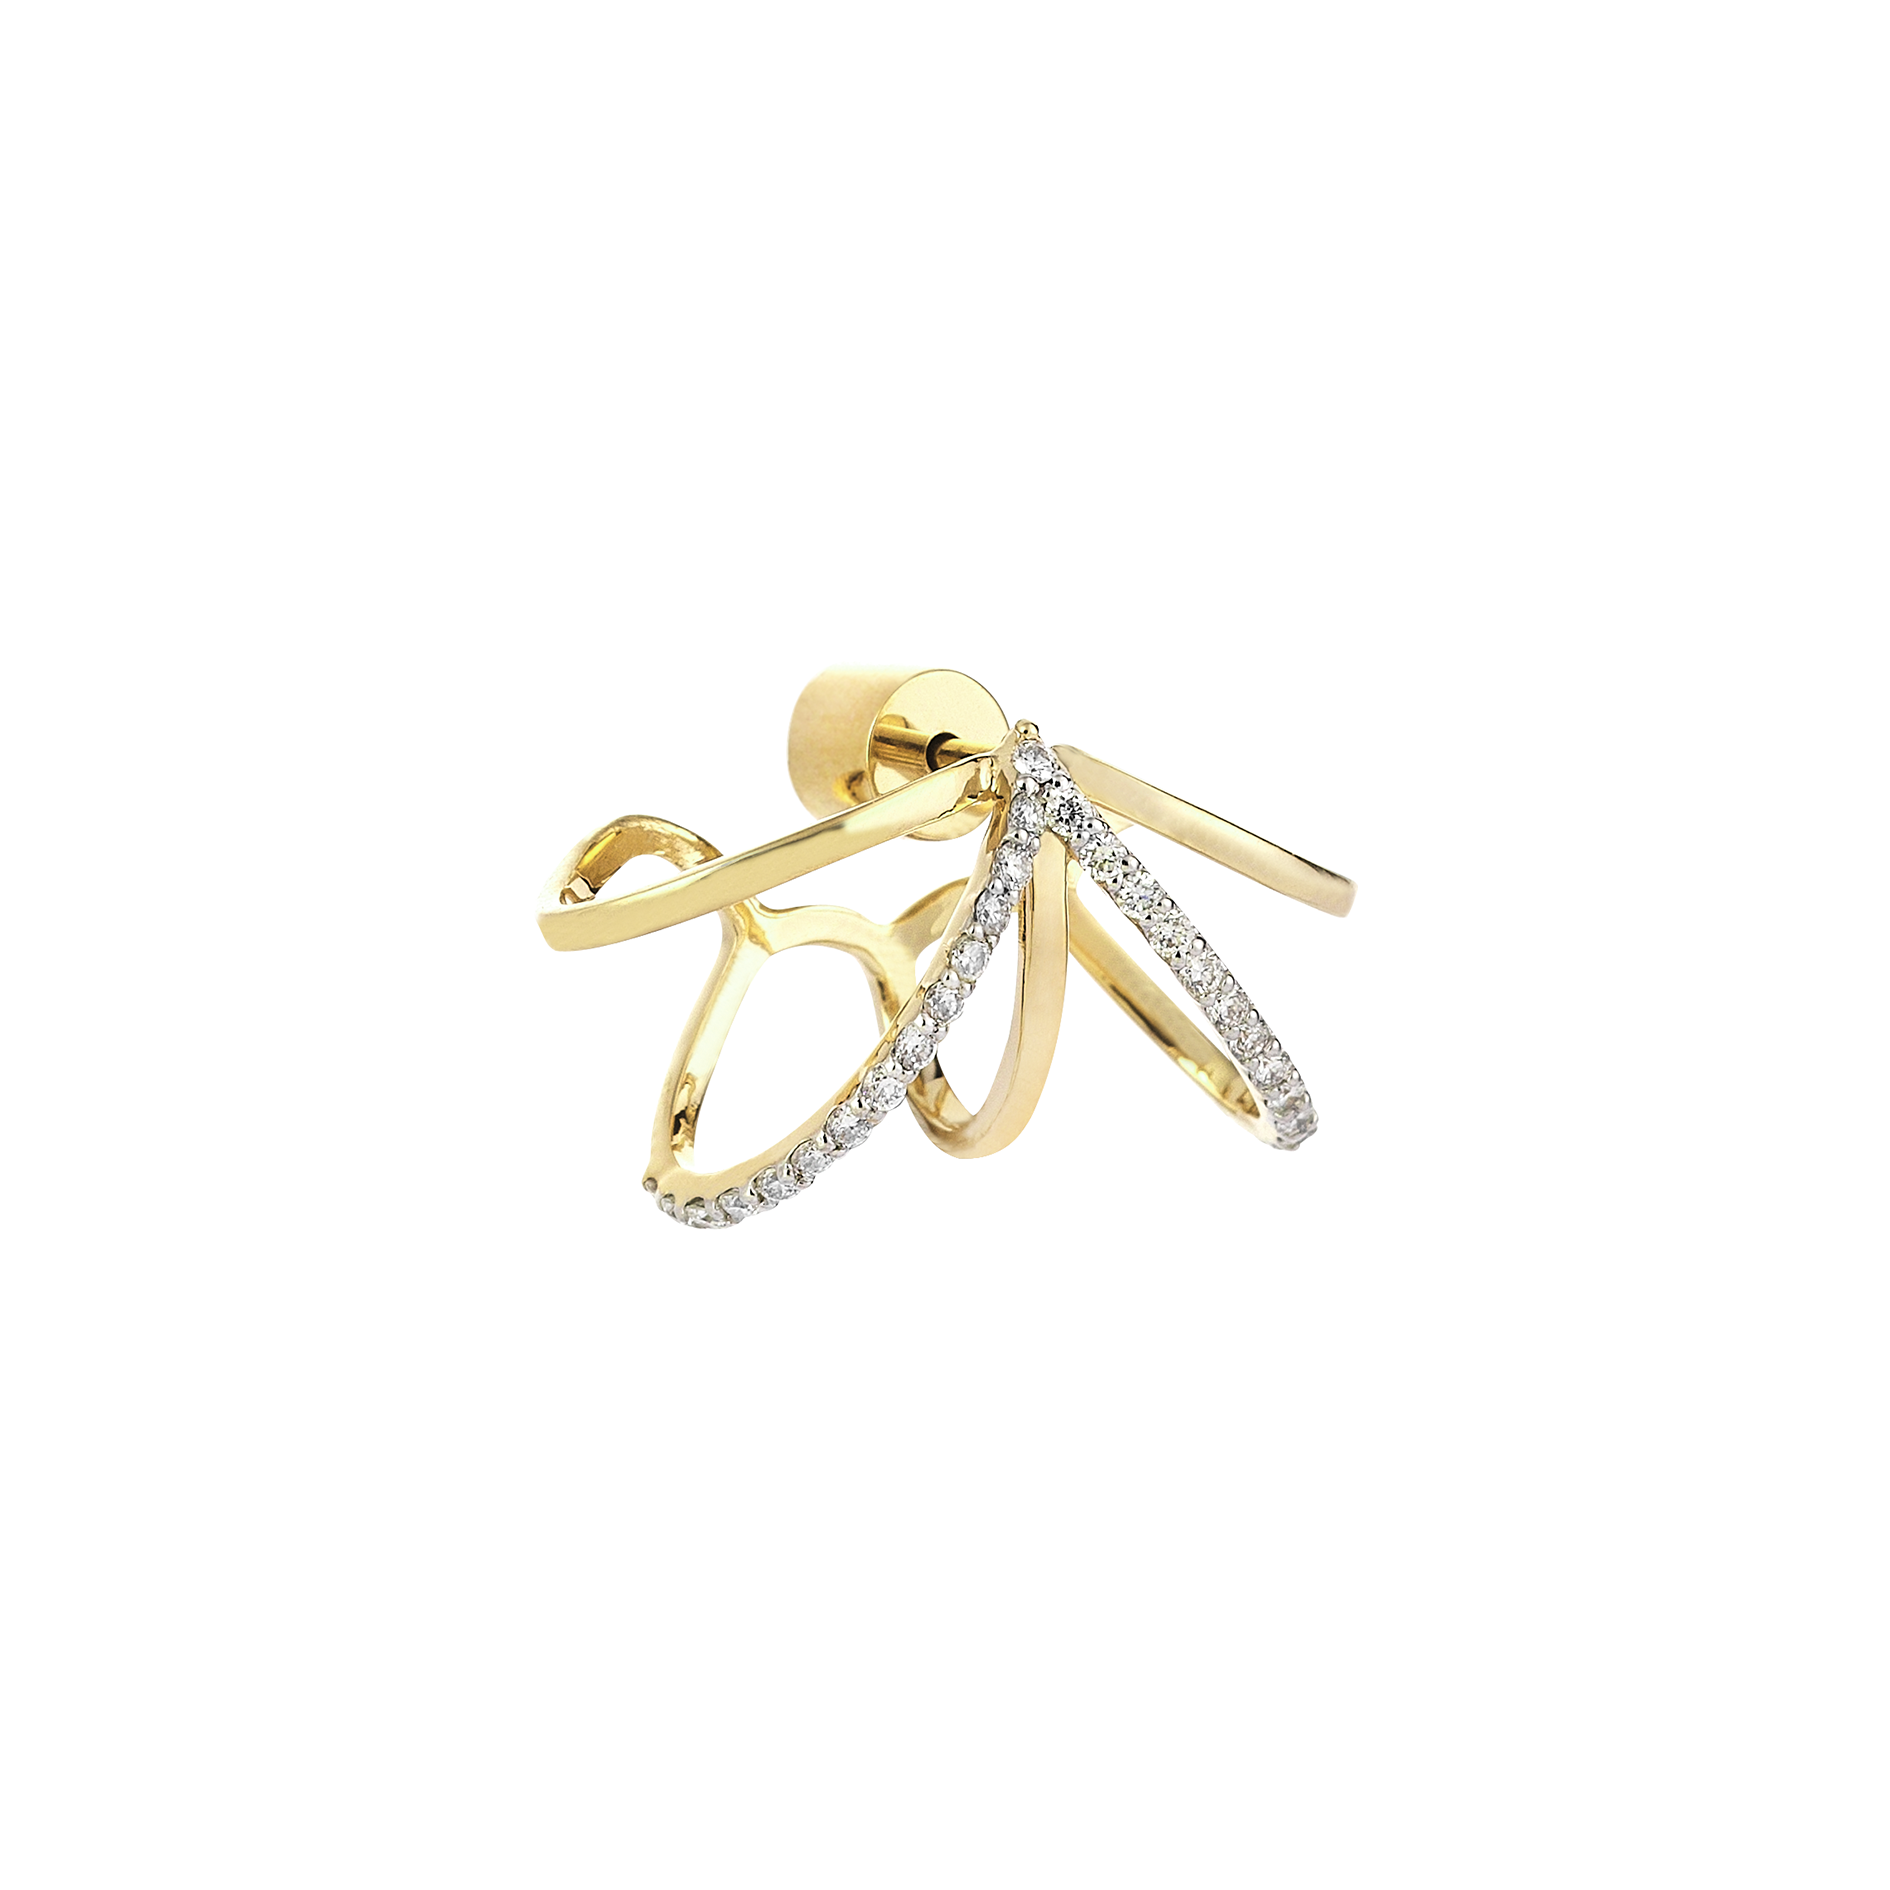 Pentapus Diamond Earcage in Yellow Gold - Her Story Shop